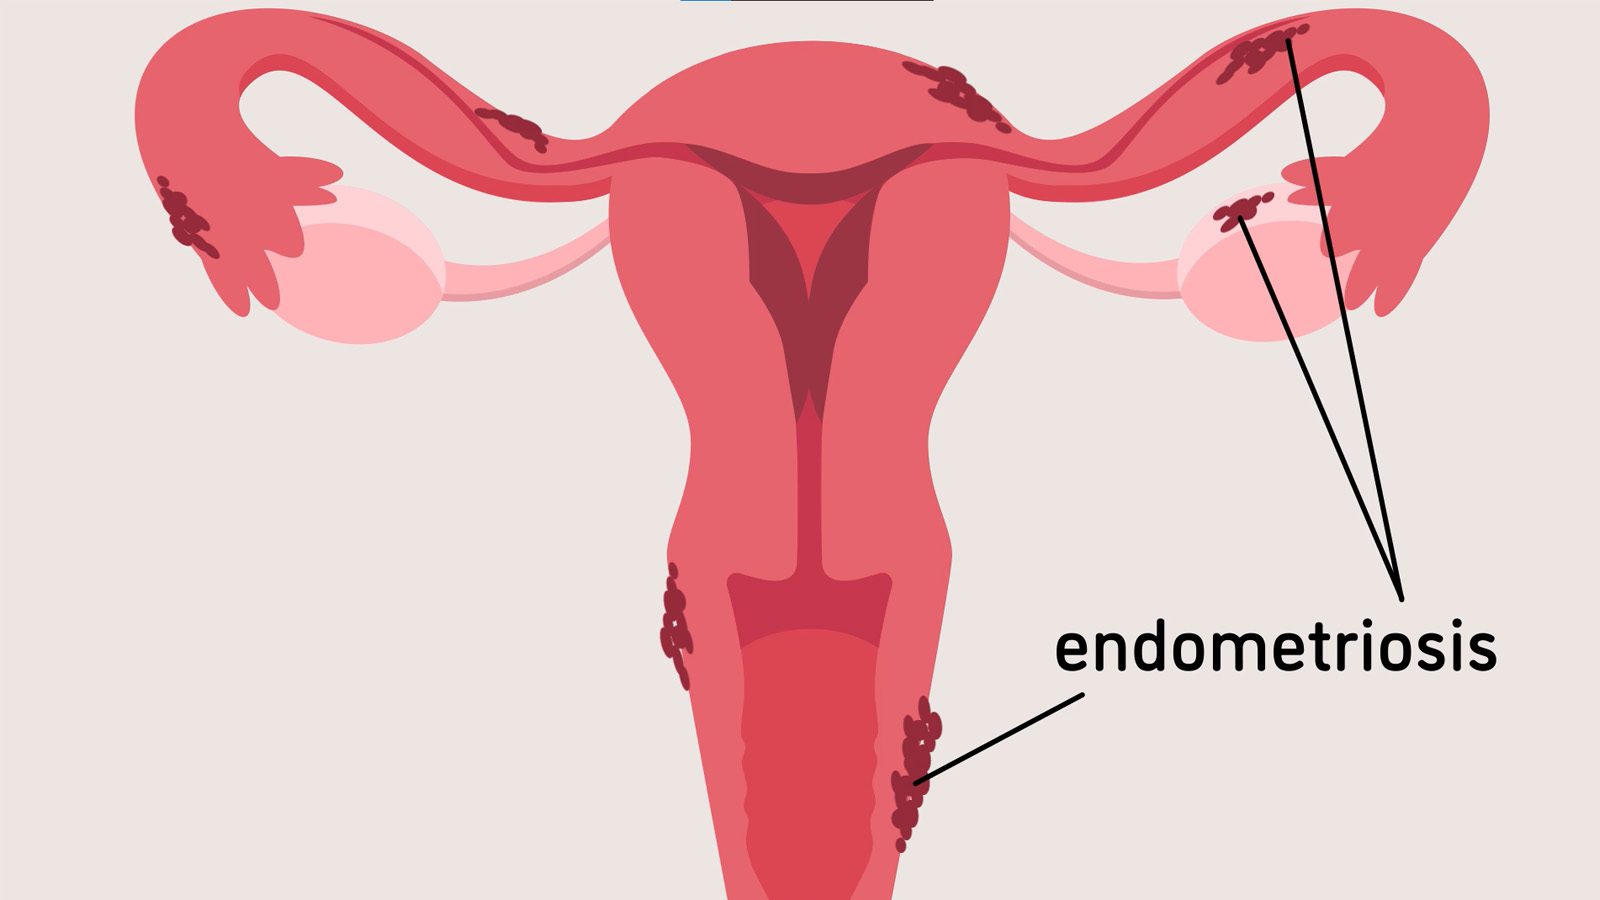 An image of a uterus taken from the "What is endometriosis?" Minute to Understanding from the Jackson Laboratory.